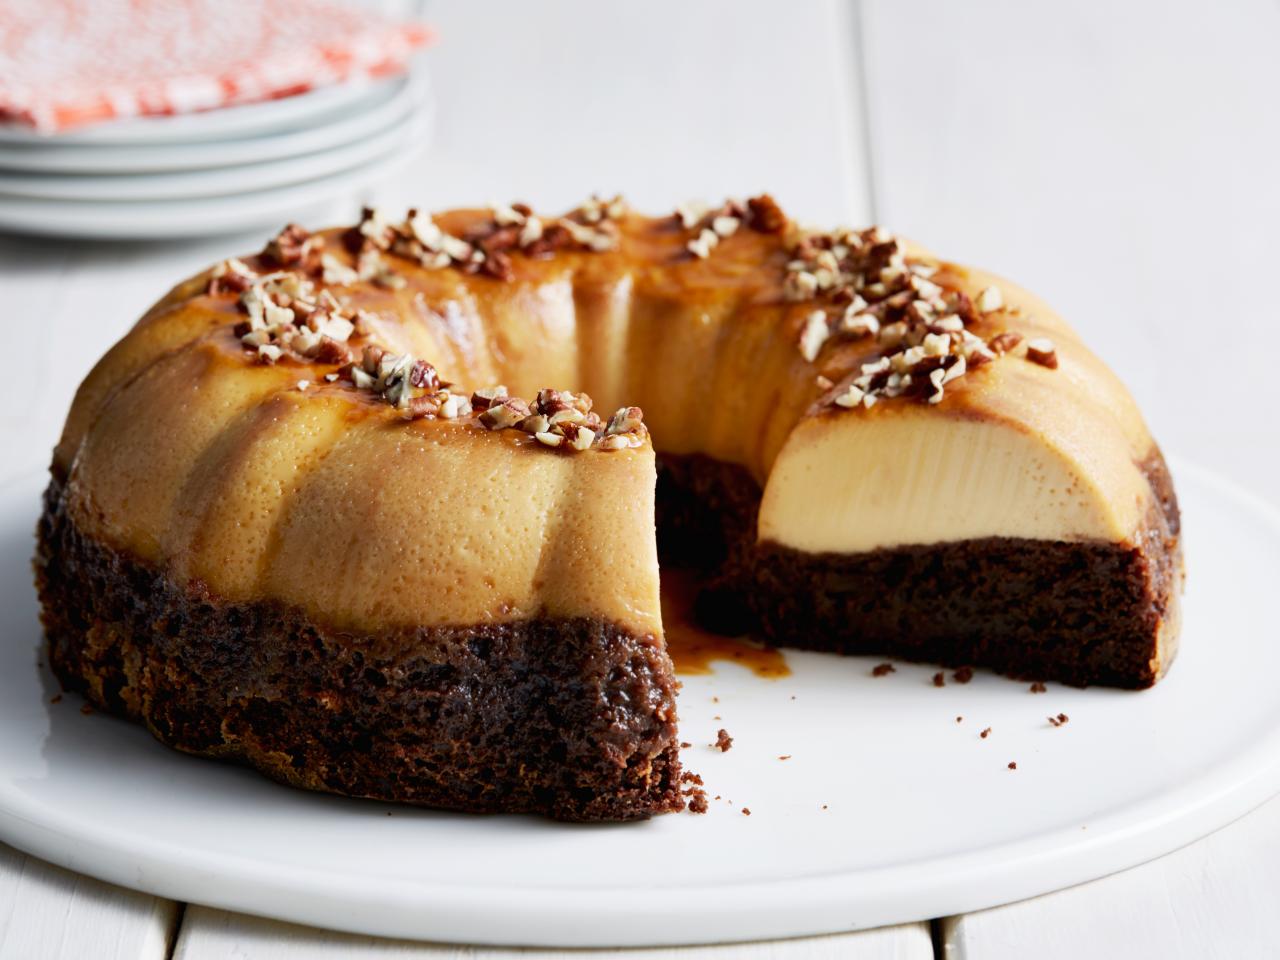 UPSIDE-DOWN CHOCOLATE FLAN WITH CARAMEL CREAM | Canadian Living